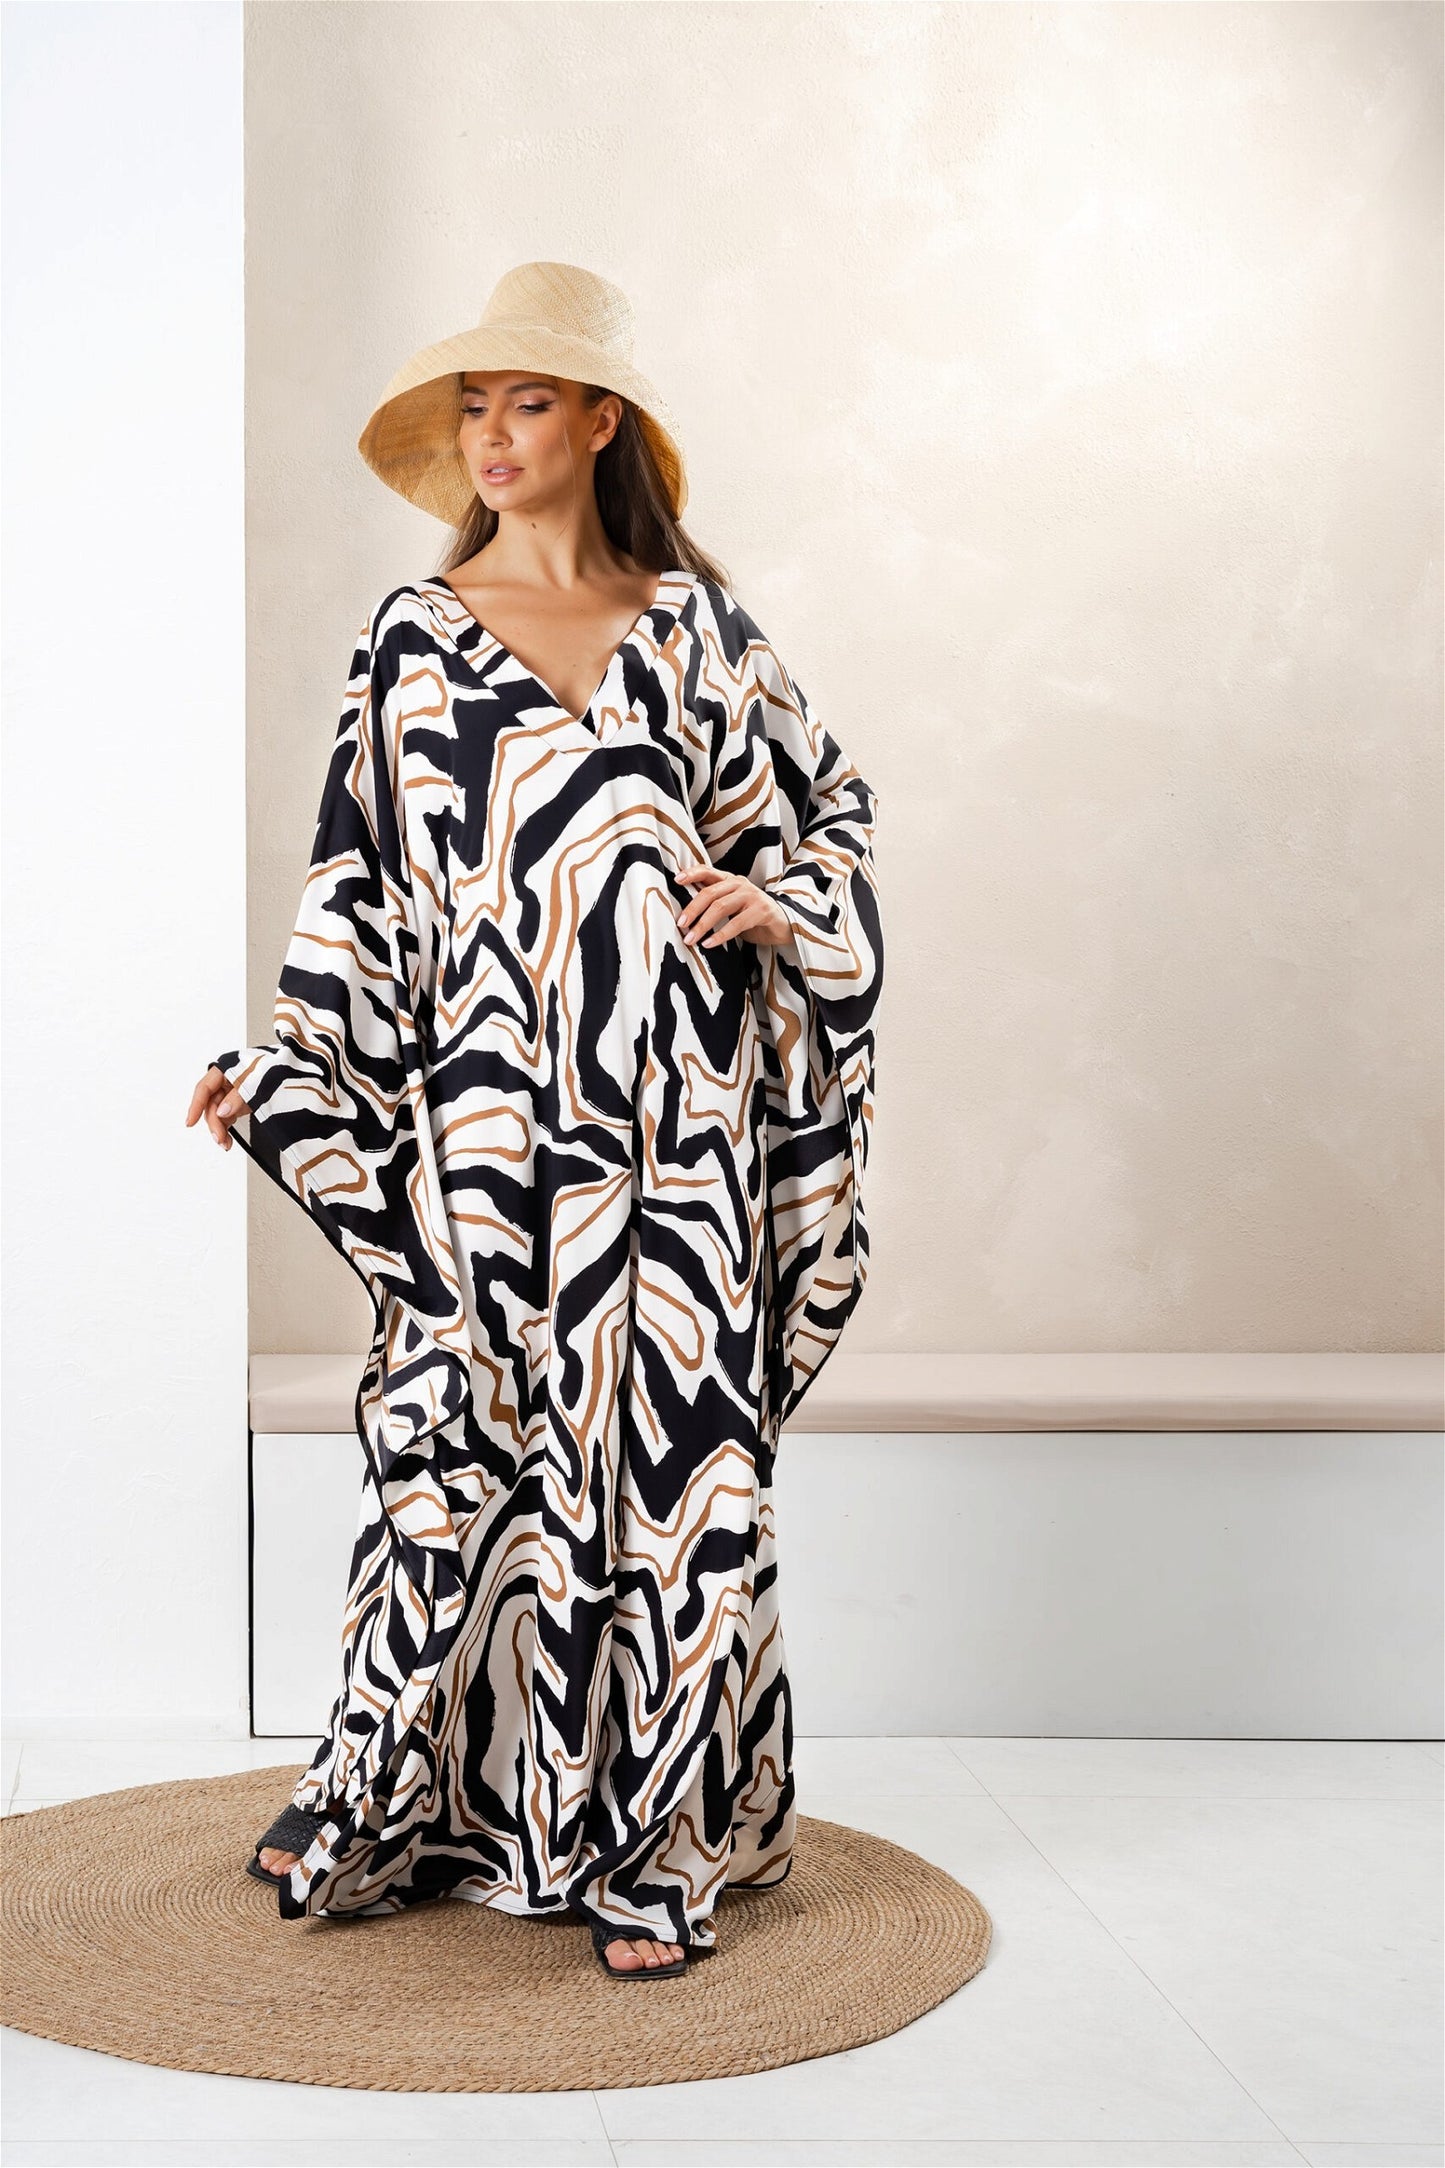 The model in the image is wearing Women Printed Long Kaftan In Silk Fabric from Alice Milan. Crafted with the finest materials and impeccable attention to detail, the Kaftan / Dress looks premium, trendy, luxurious and offers unparalleled comfort. It’s a perfect clothing option for loungewear, resort wear, party wear or for an airport look. The woman in the image looks happy, and confident with her style statement putting a happy smile on her face.